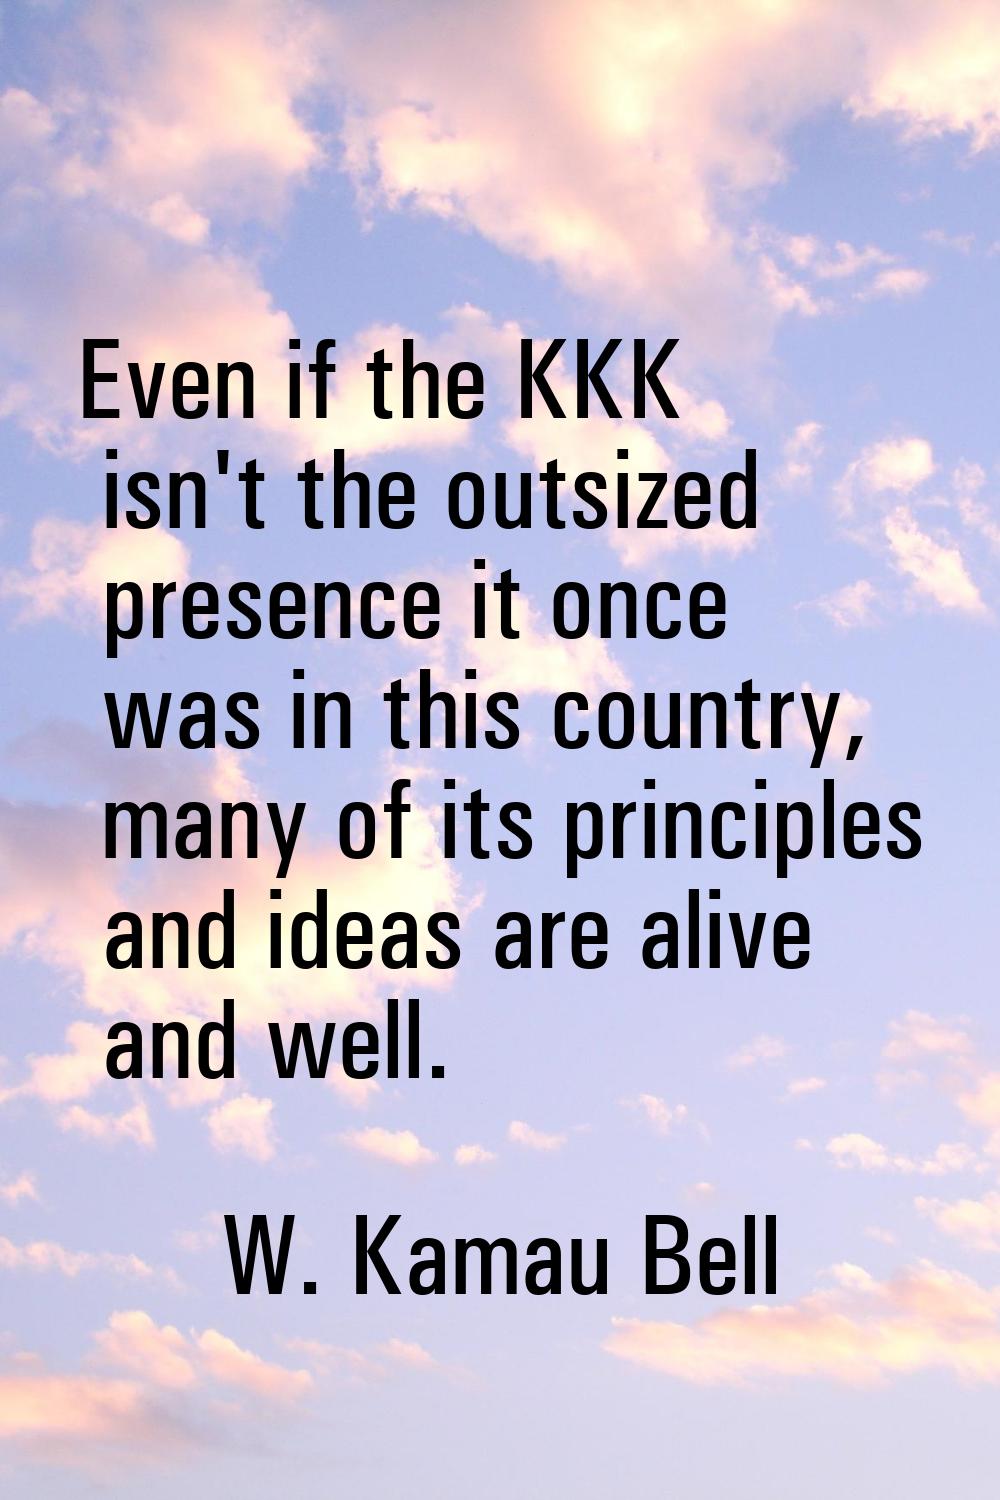 Even if the KKK isn't the outsized presence it once was in this country, many of its principles and